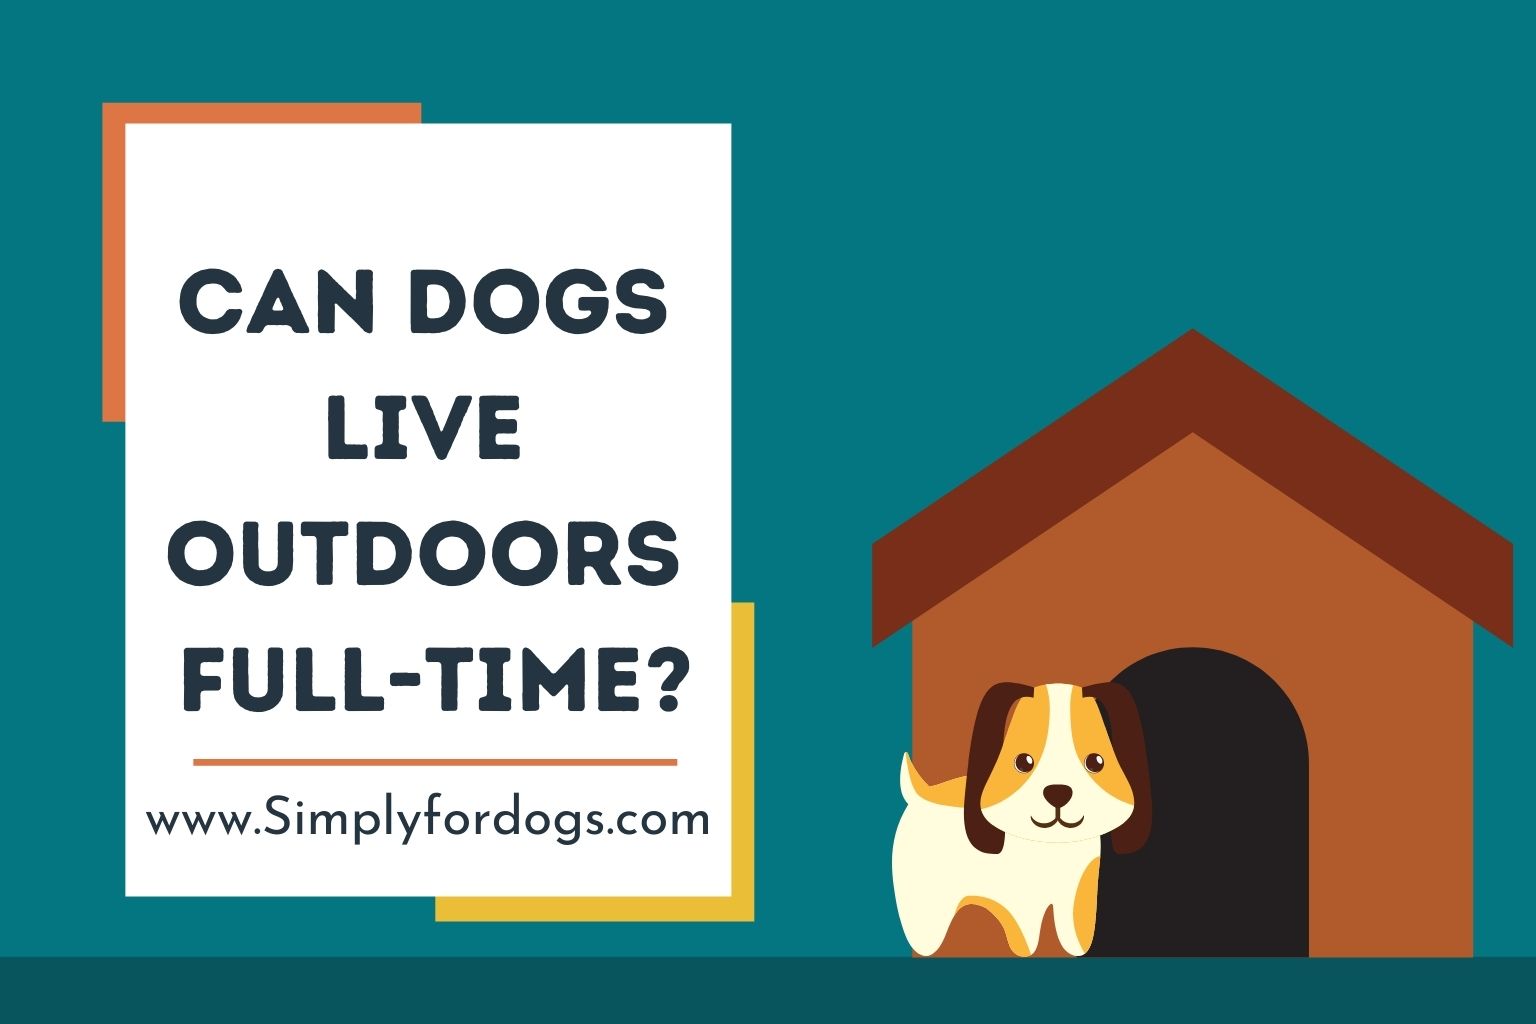 Can Dogs Live Outdoors Full-Time